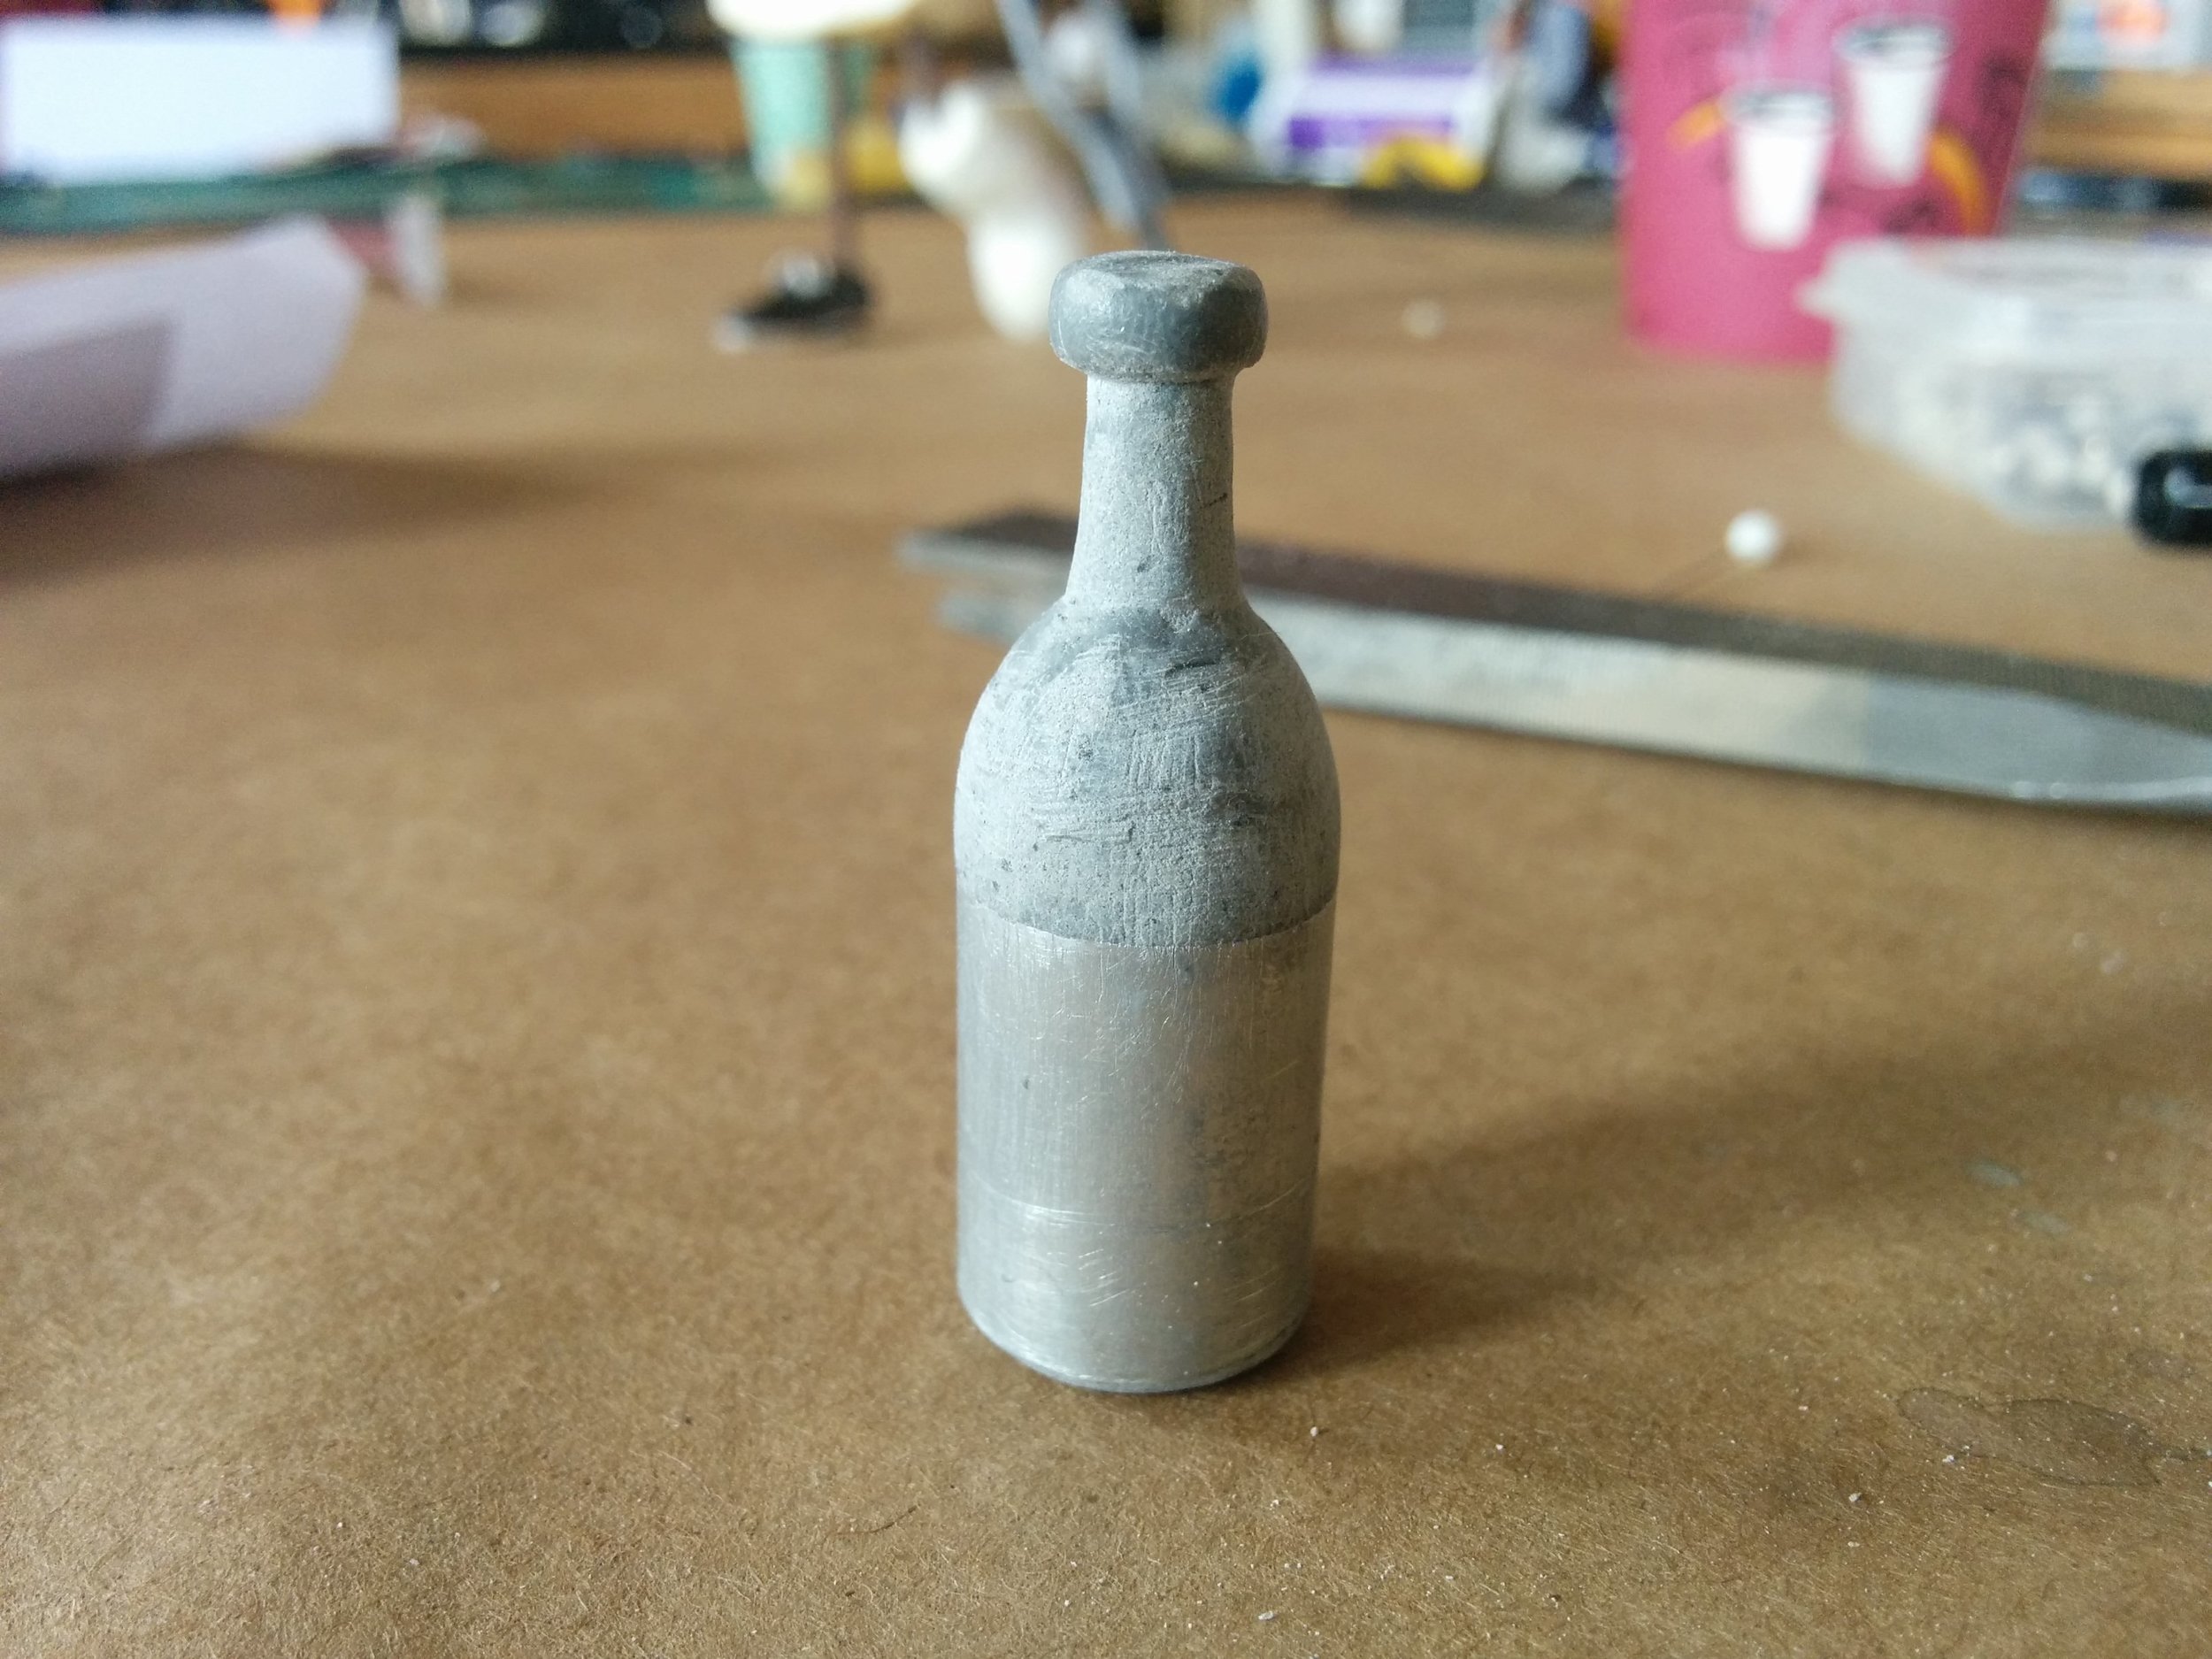  bottle prop sculpt with expoxy putty and aluminum tube base. 